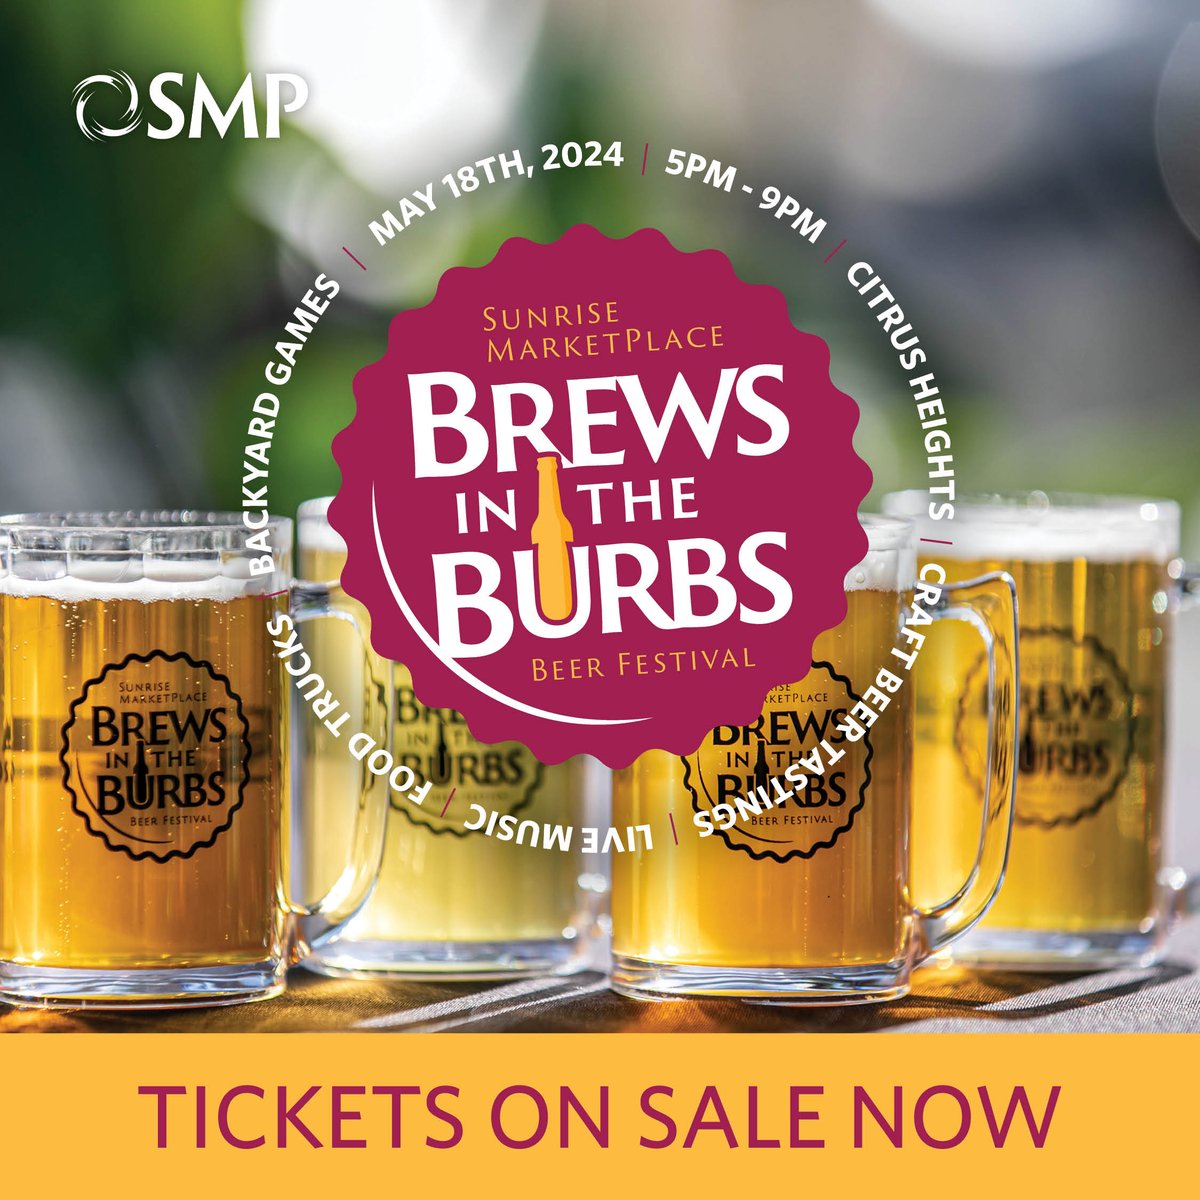 Get ready for a day of fun and brews!🍻 Tune into 98 Rock for your chance to win VIP tickets to Brews in the Burbs at Sunrise Marketplace on May 18th. Simply listen to Abe Kanan in the Afternoons, dial (916)909-0985, and get ready to enjoy NorCal's finest brews!🍺